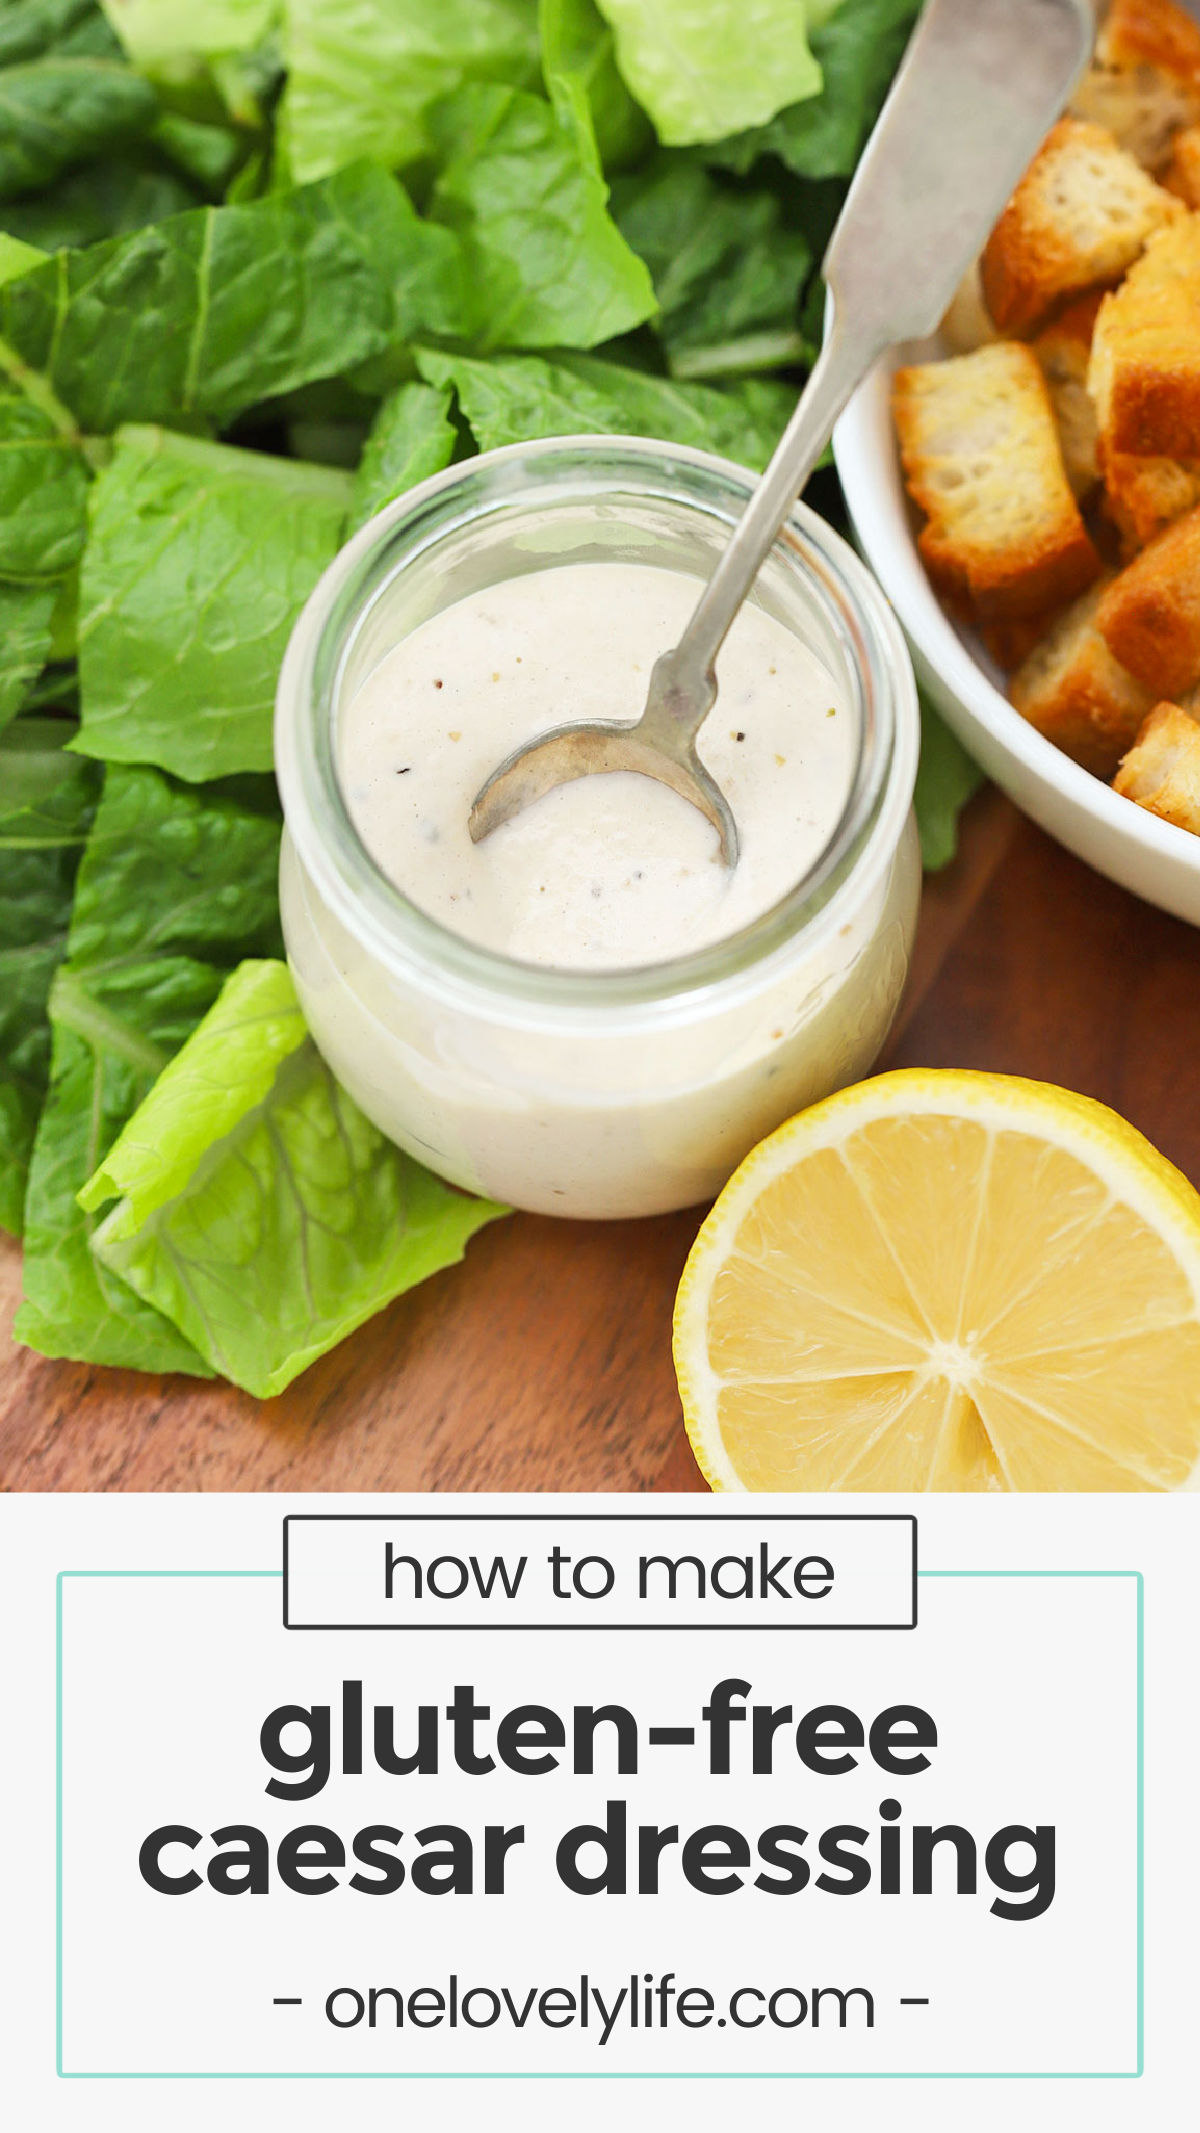 Our Easy Caesar Dressing recipe is perfect for weeknight salads, wraps, and more. No anchovy paste required! (Gluten-Free) // Caesar salad dressing without anchovies / caesar dressing without anchovy paste / homemade caesar dressing / caesar salad dressing from scratch / homemade salad dressing / side salad dressing / parmesan salad dressing / caesar salad dressing no anchovy paste / gluten free salad dressing